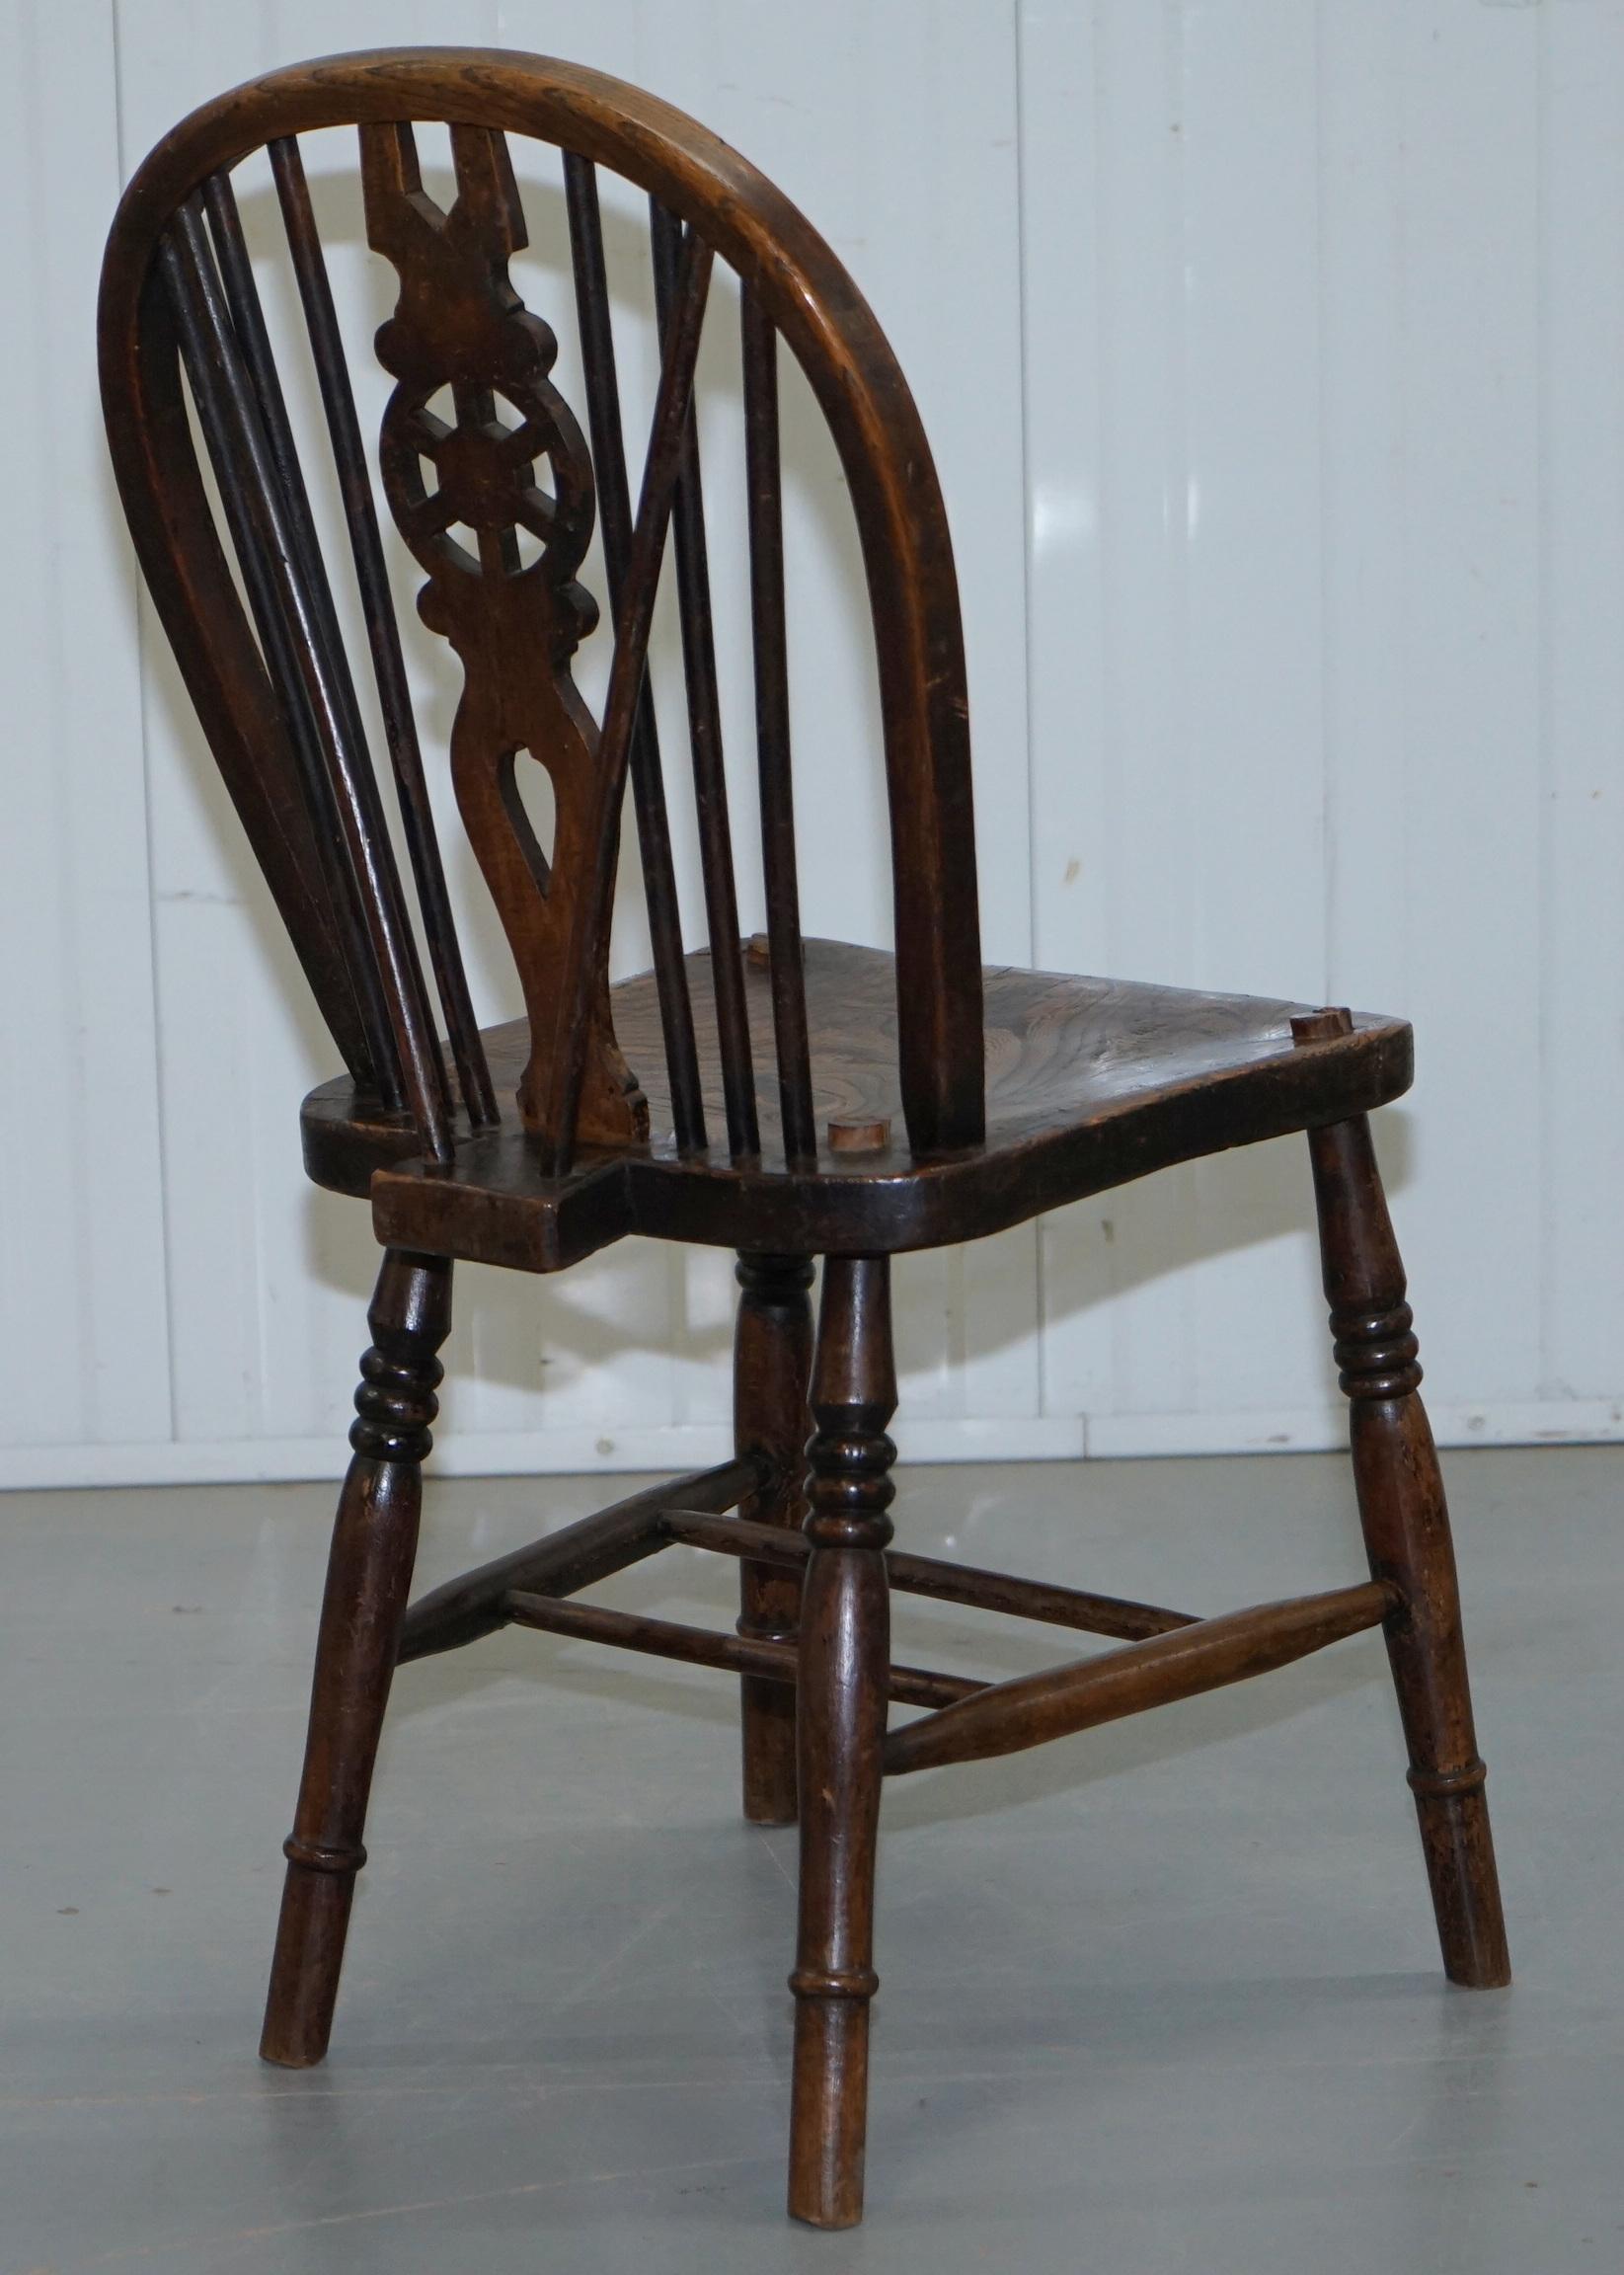 Rare Set of 6 Victorian 1840 Hoop Back Windsor Chairs High Wycombe, England 2